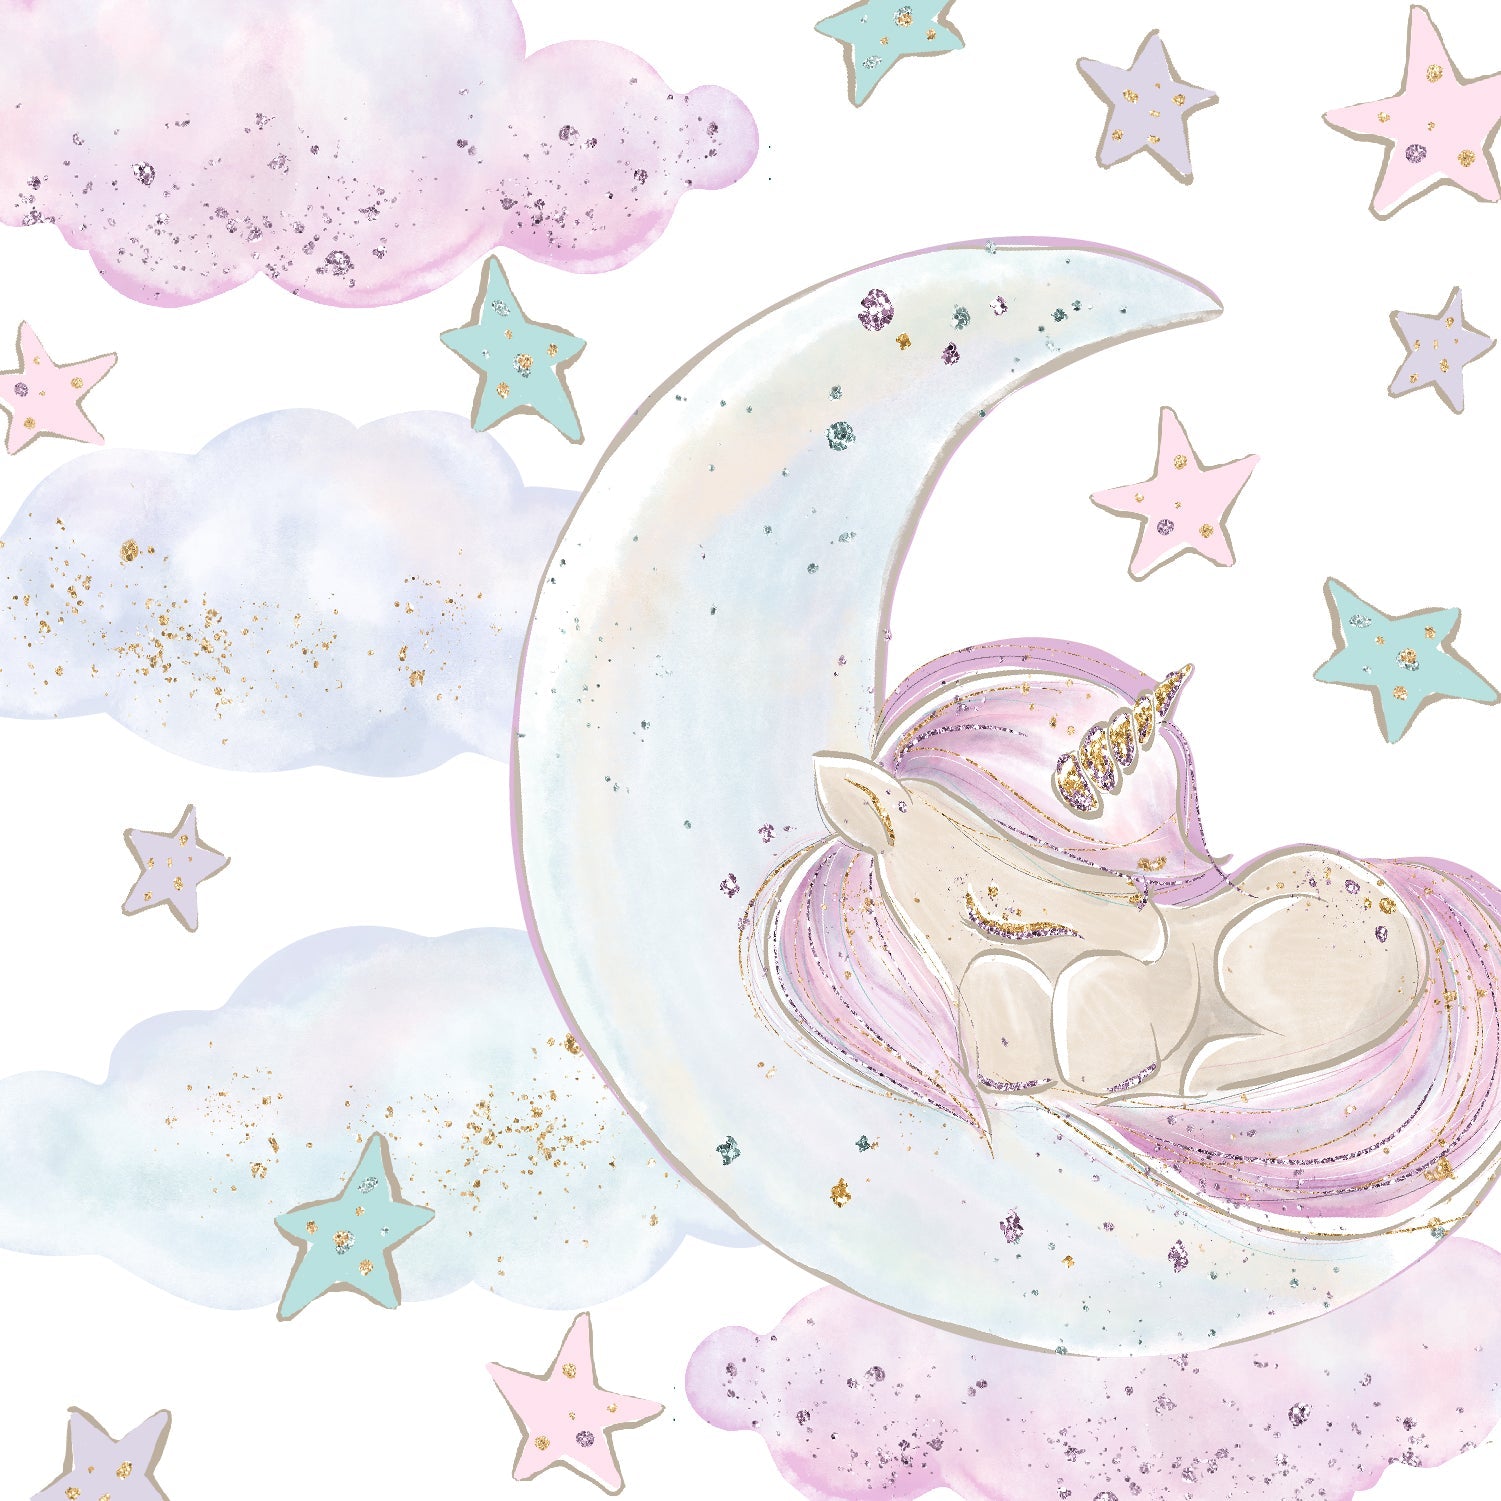 Unicorn Sleeping on the Moon Wall Decals Removable Wallpaper Stickers - Picture Perfect Decals